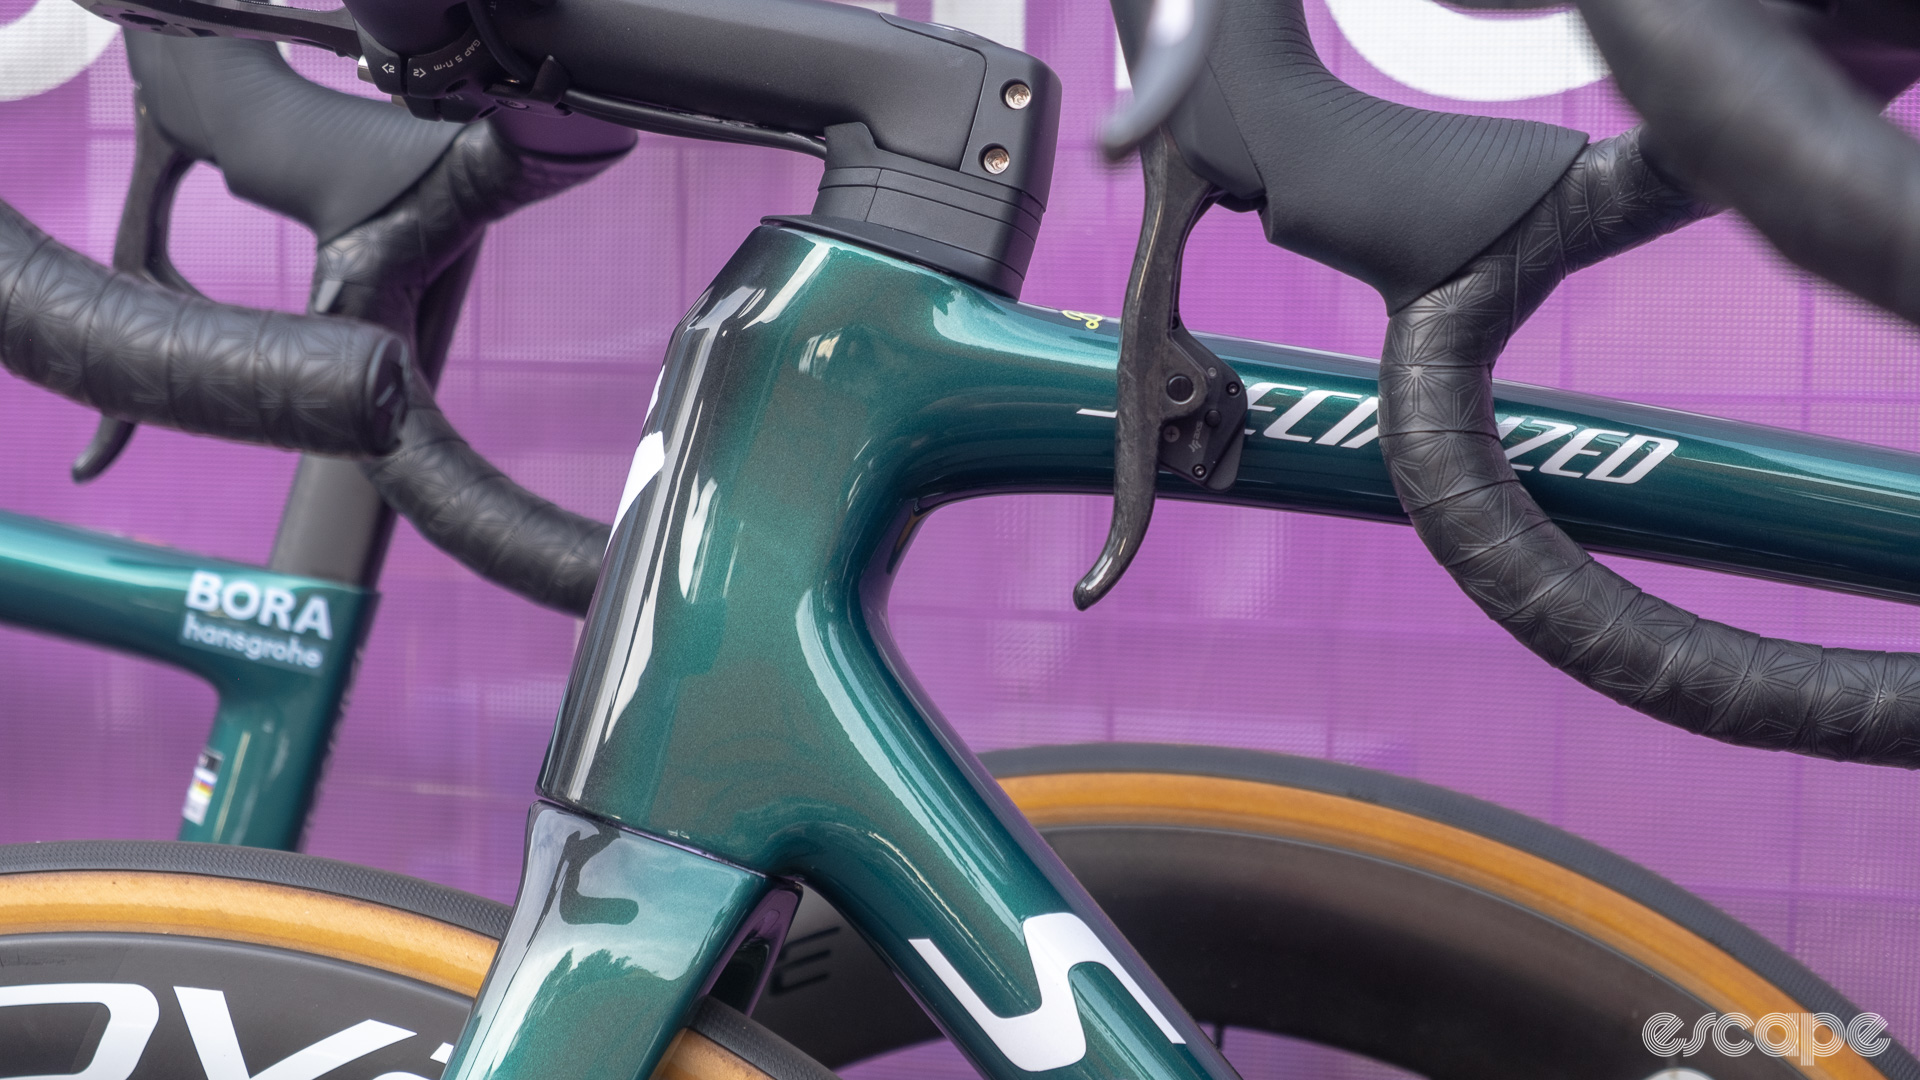 The image shows the head tube of a Specialized Tarmac SL8 